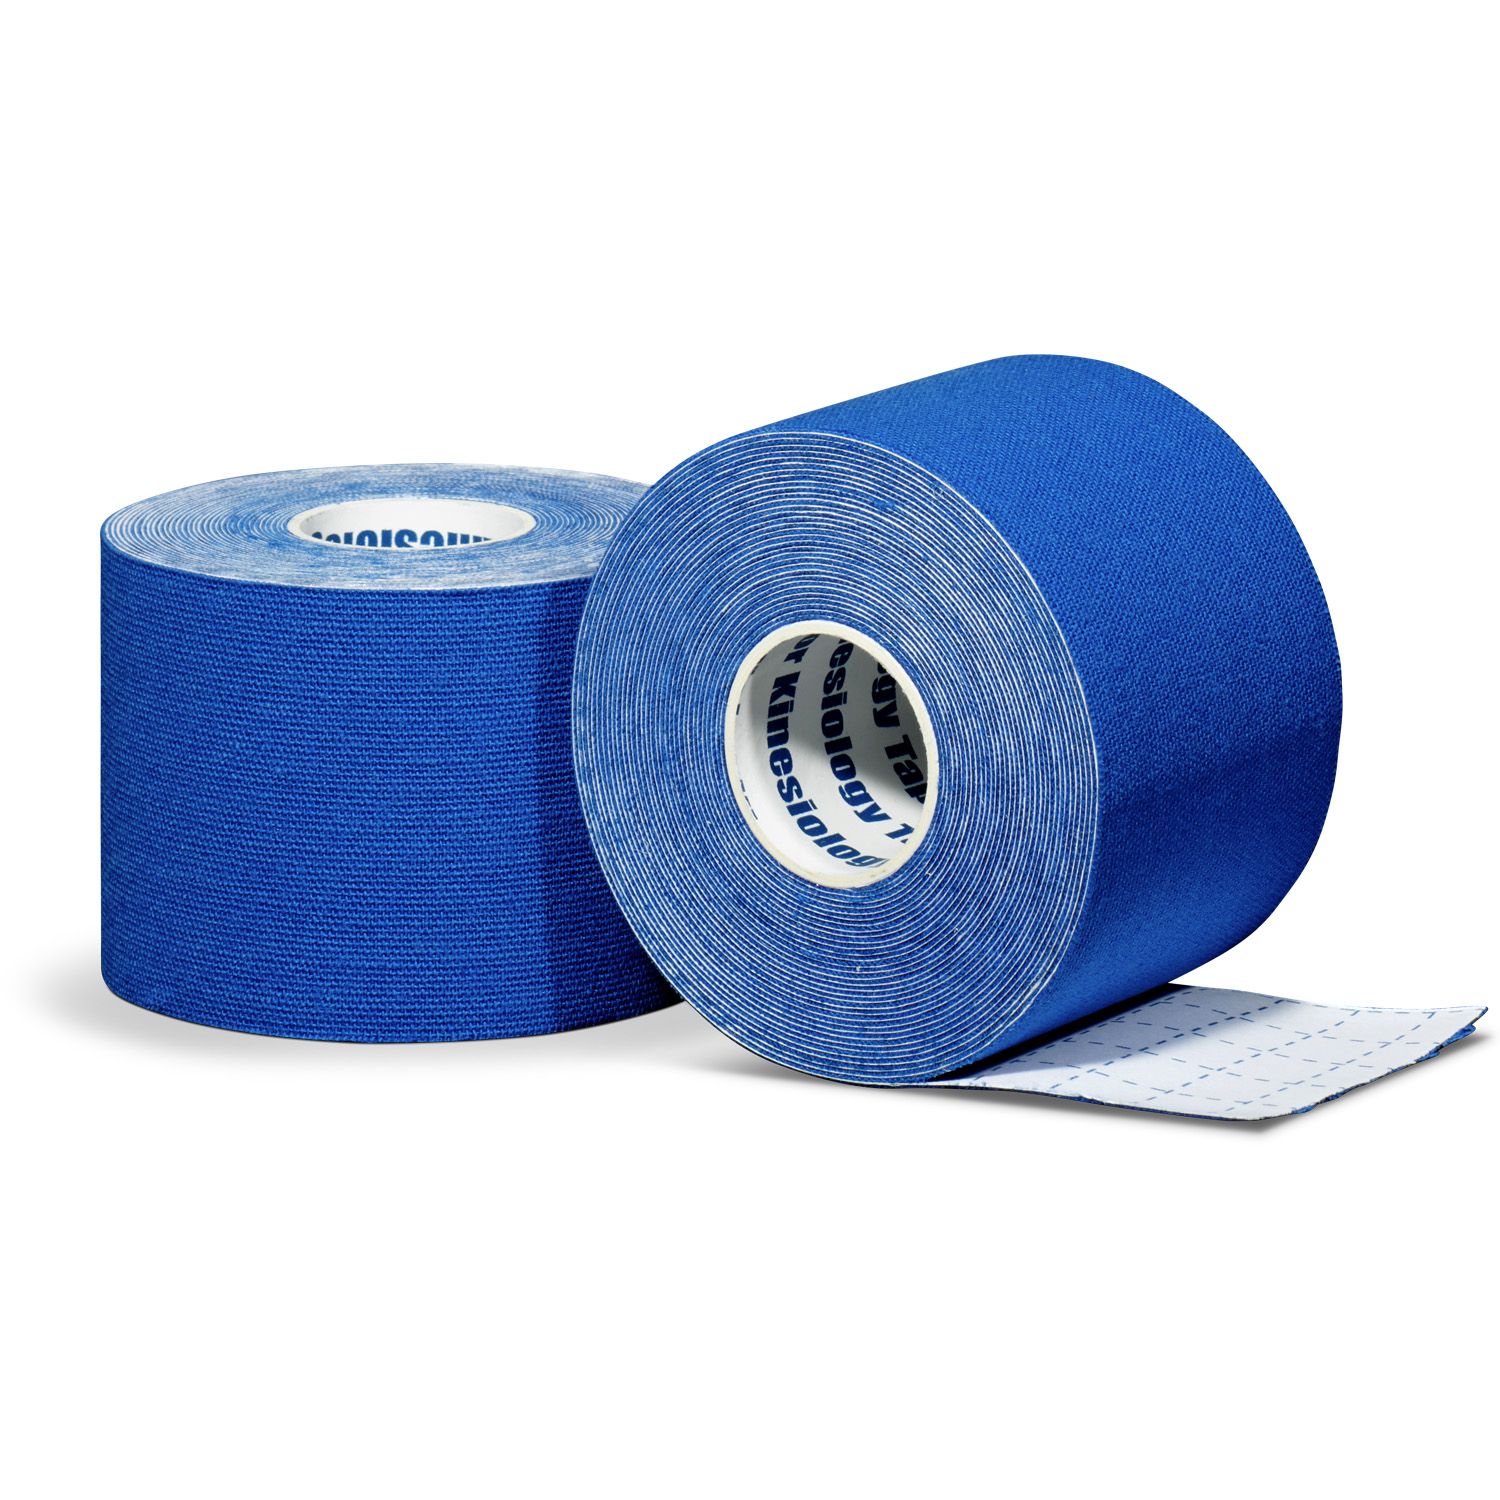 Kinesiology tape per roll dark-blue front and back view